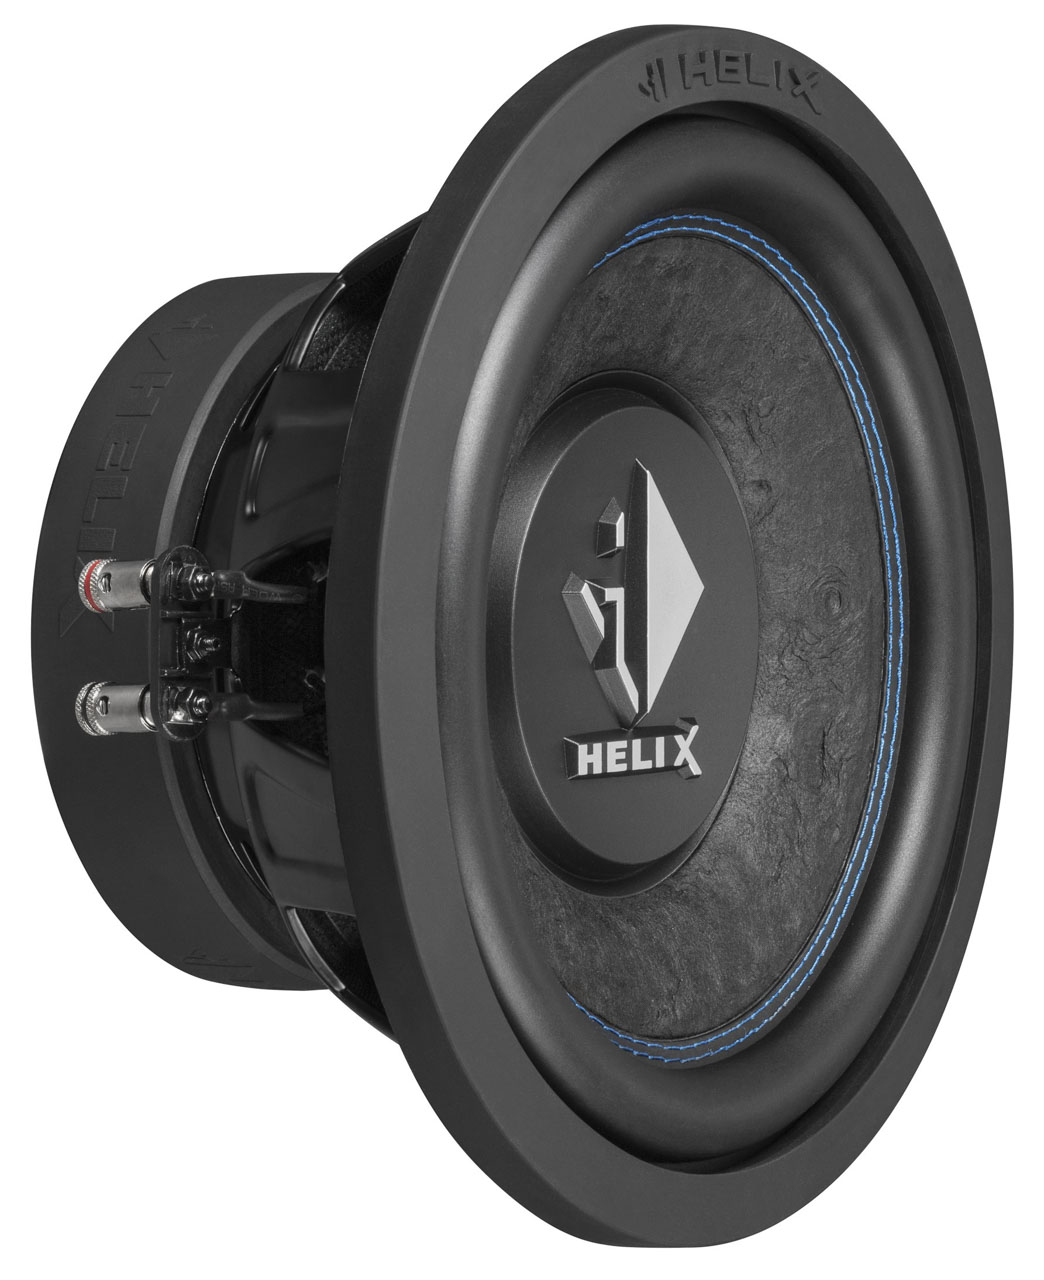 HELIX-K-10W_Pers-Membran_1044x1280px_16-04-20